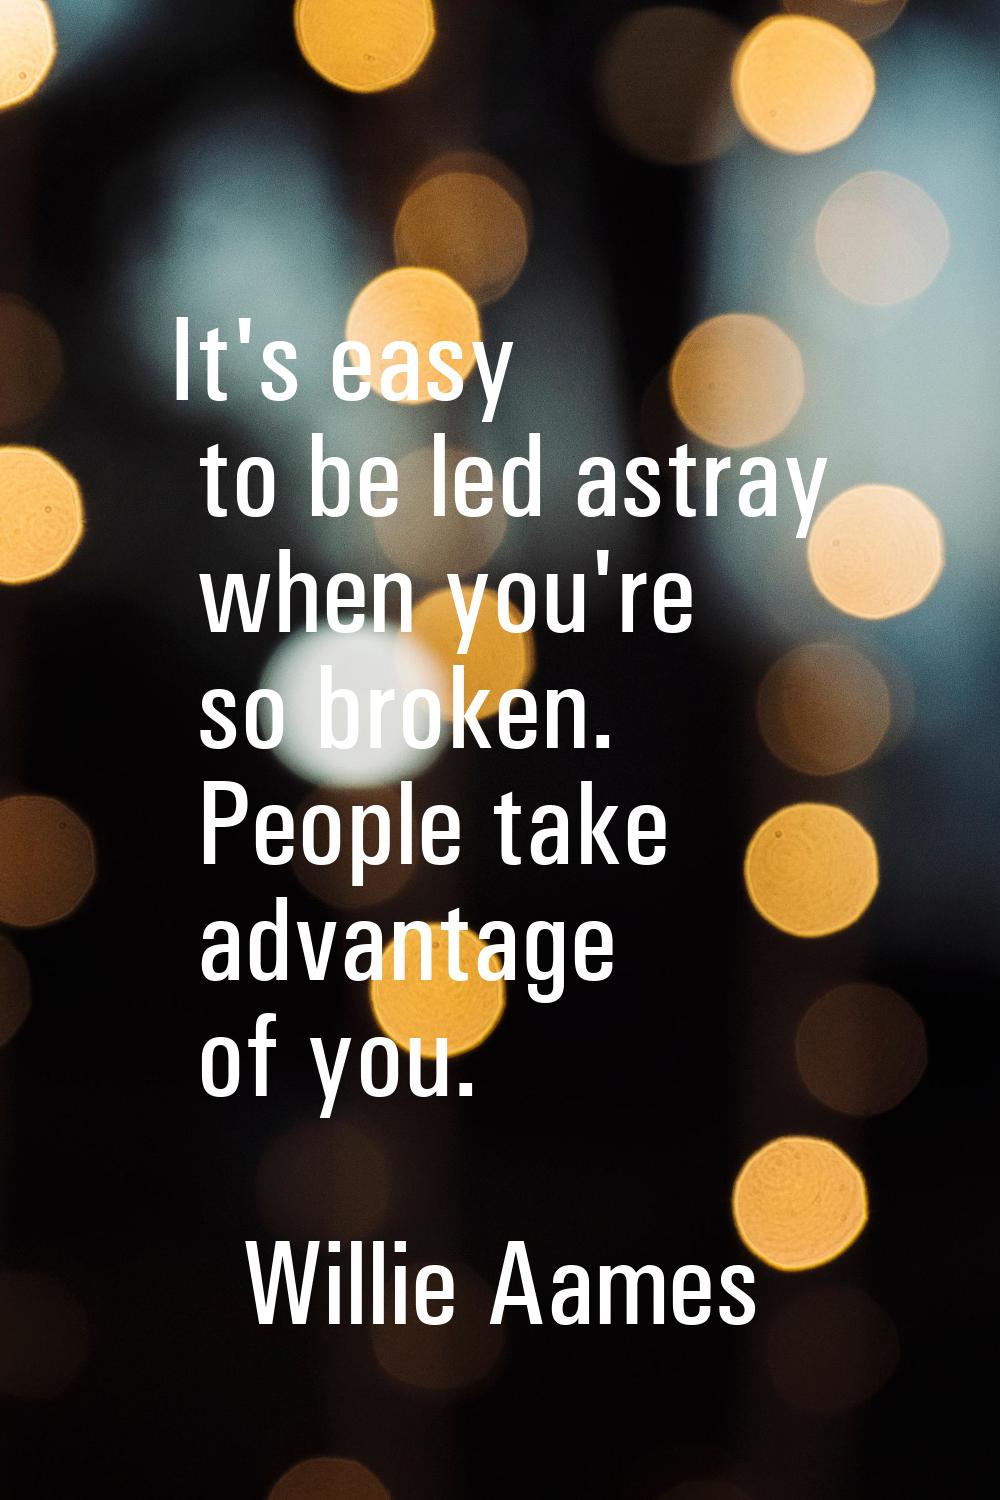 It's easy to be led astray when you're so broken. People take advantage of you.